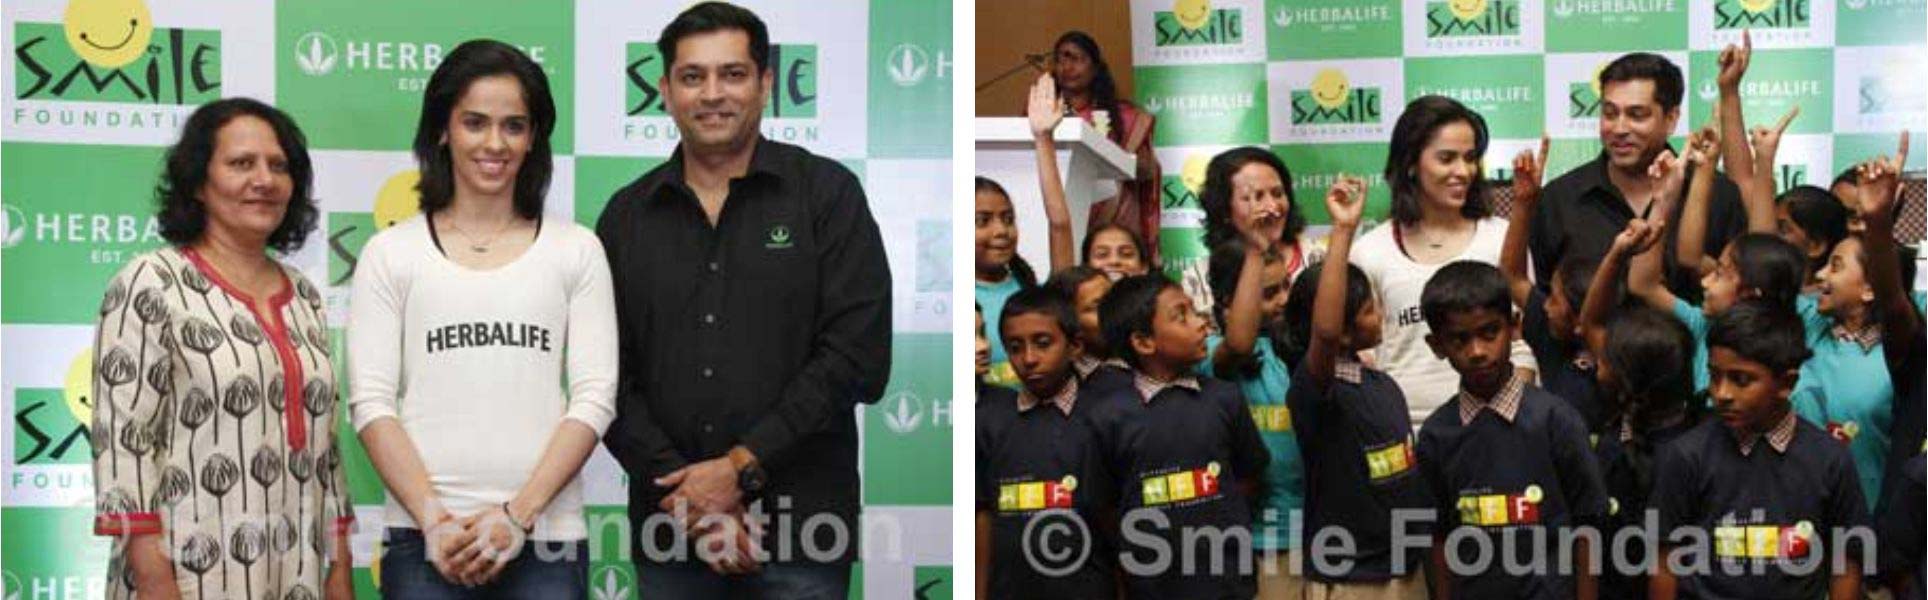 Saina Nehwal meets Smile kids at launch of nutrition programme